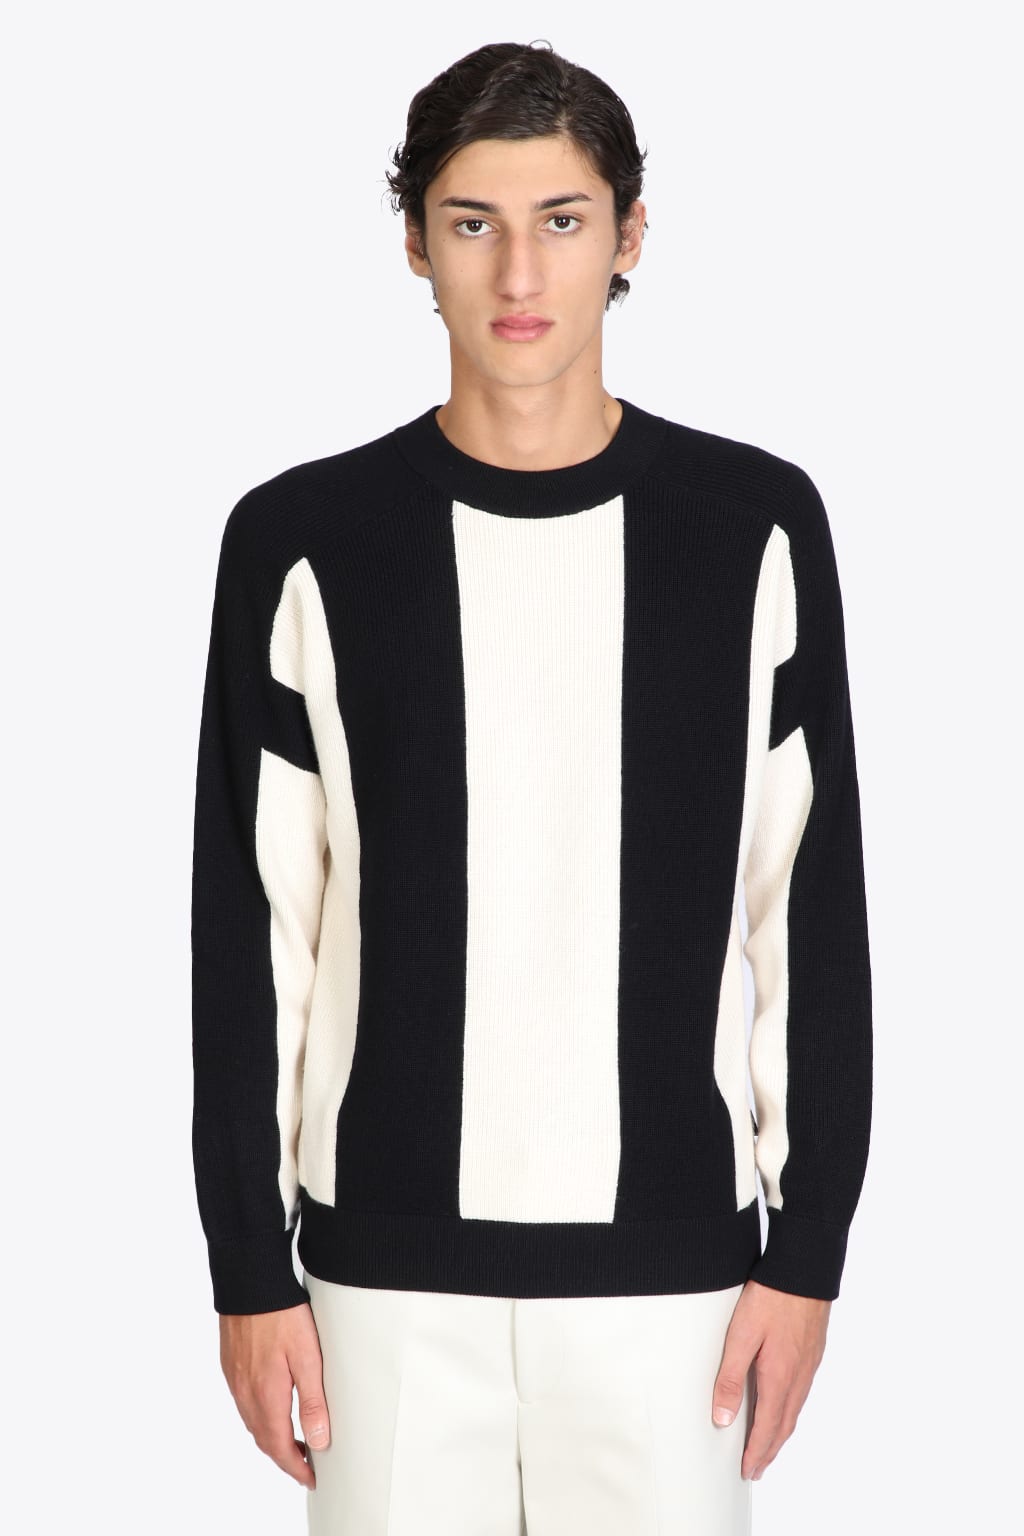 Emporio Armani Pullover Navy blue and off-white swool striped sweater.